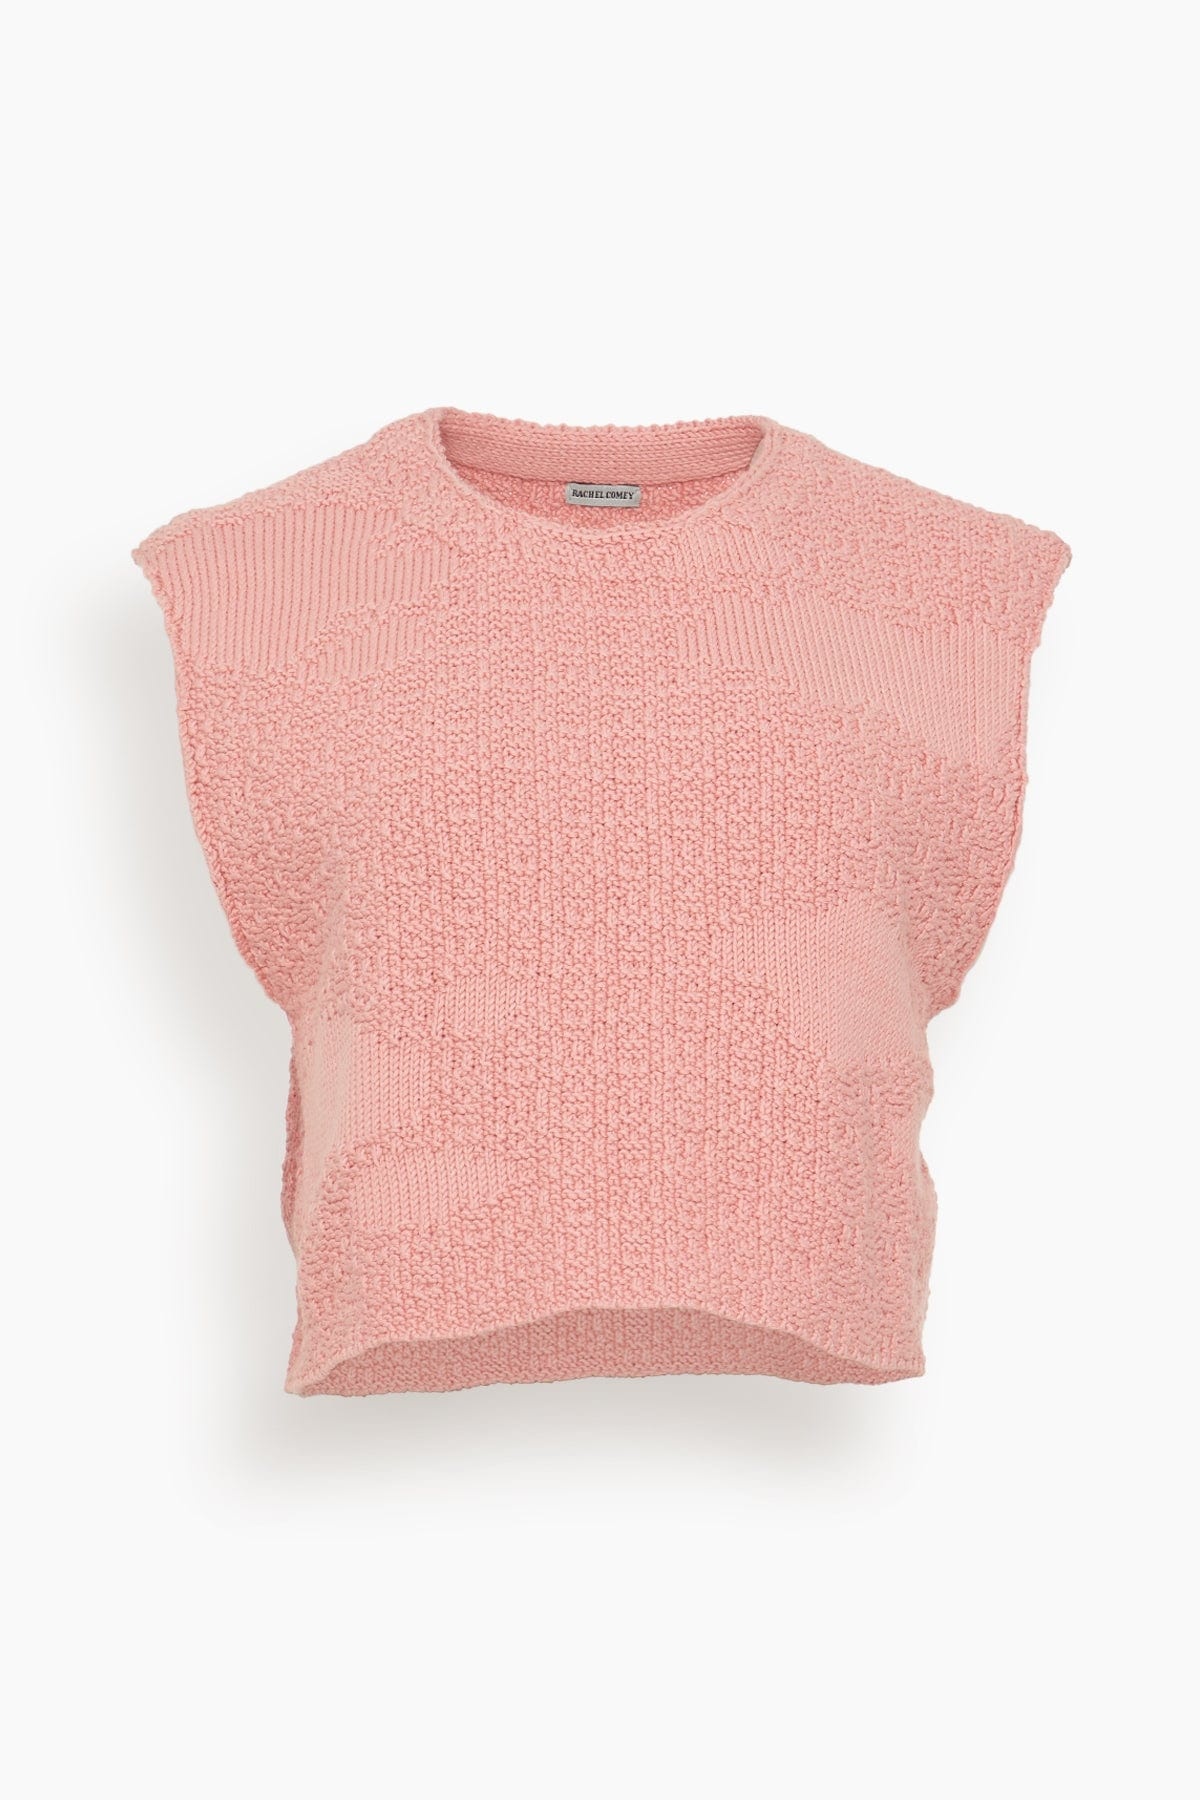 Pacer Top in Pink - 1